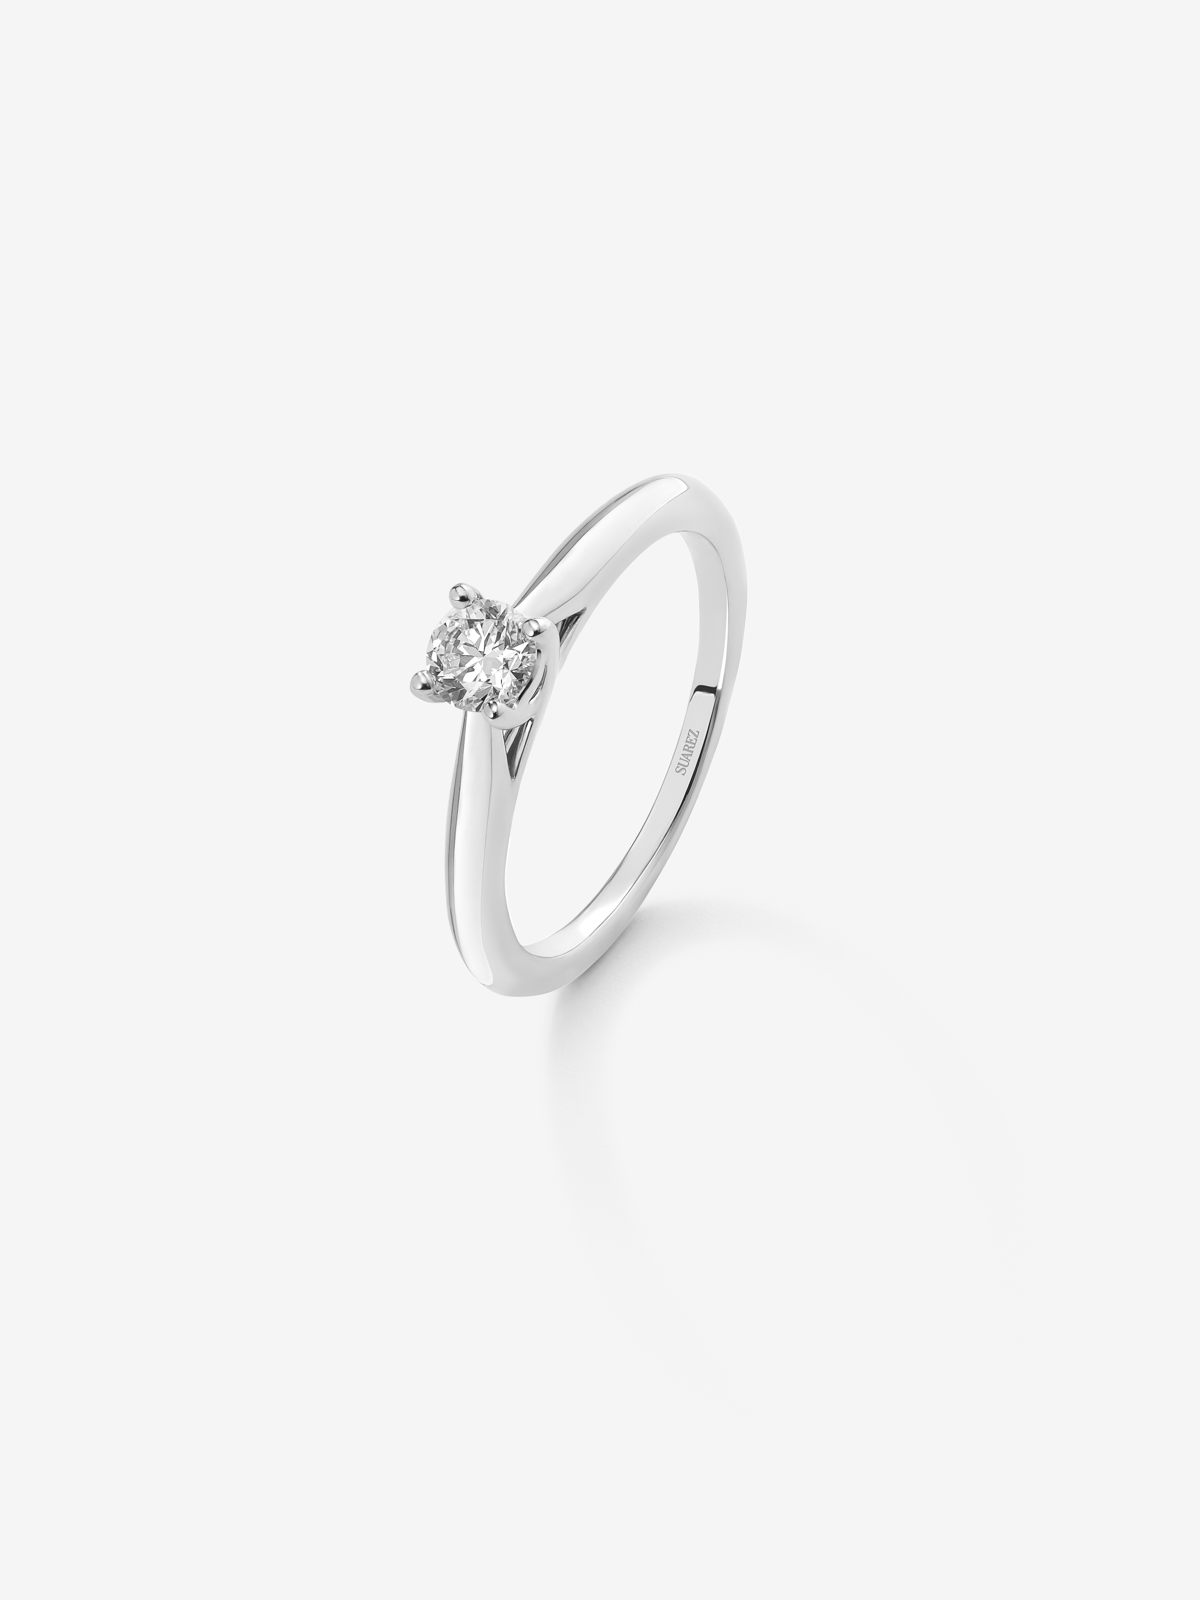 18K White Gold Commitment Ring with Diamond